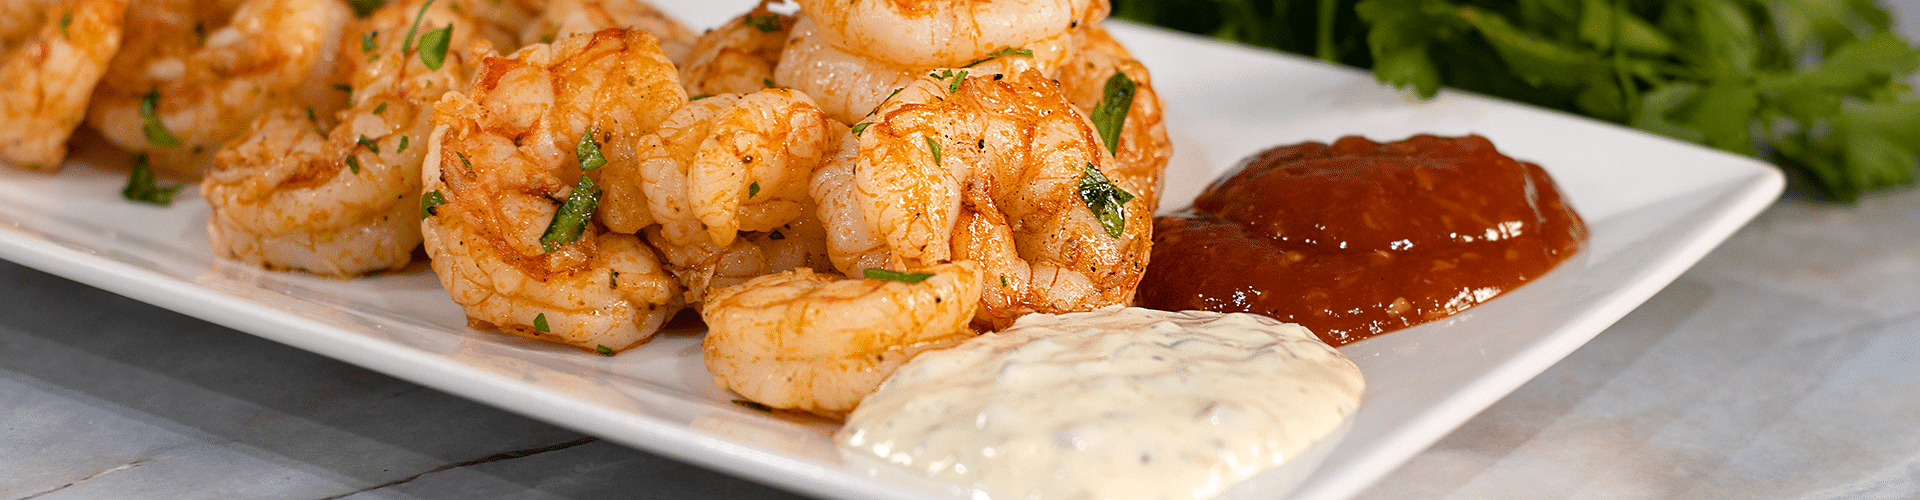 gluten free dairy free seafood sauces and grilled shrimp full 01